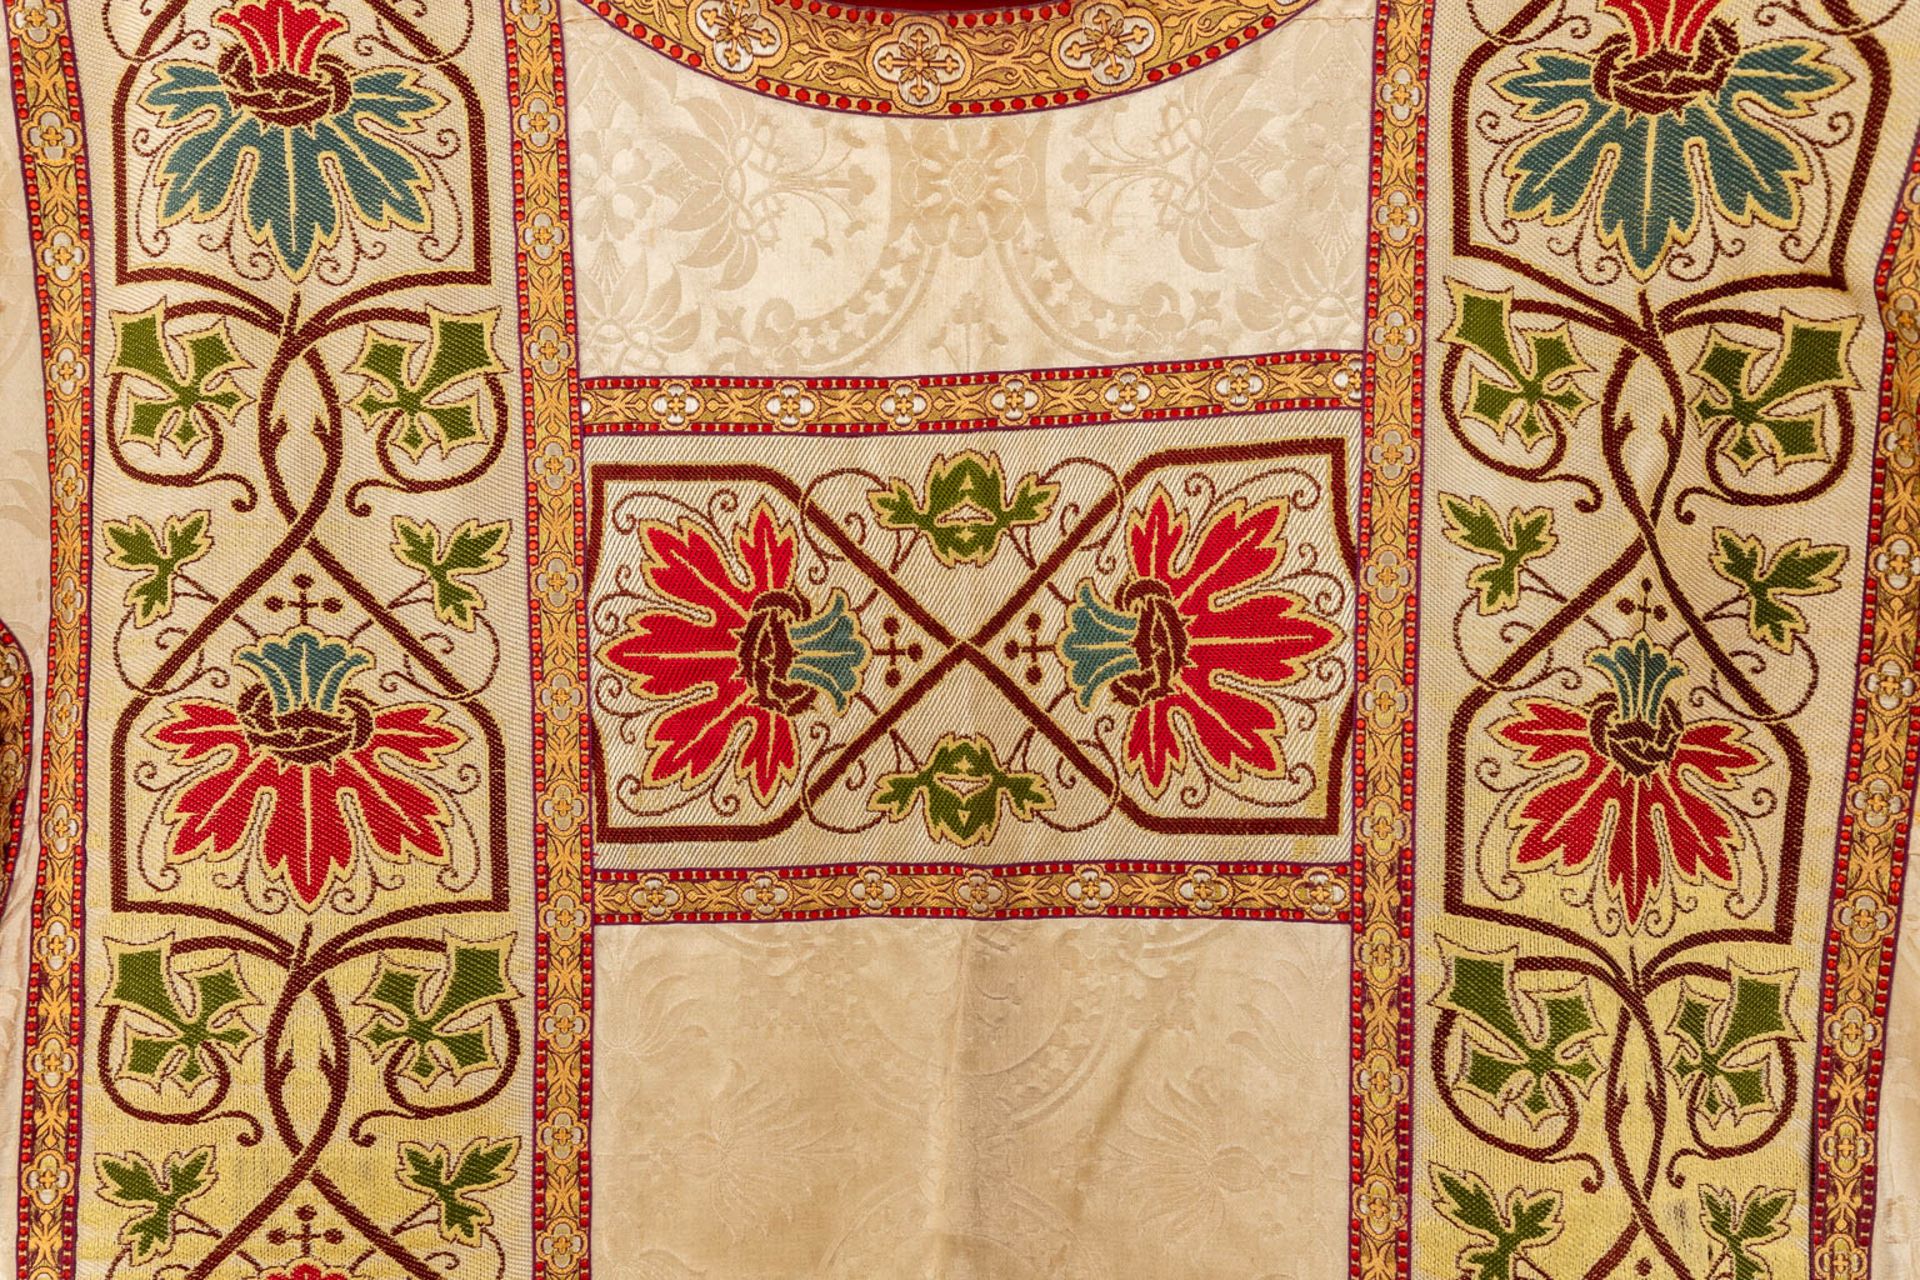 Four Dalmatics, Two Roman Chasubles, A stola and Chalice Veil, finished with embroideries. - Image 10 of 59